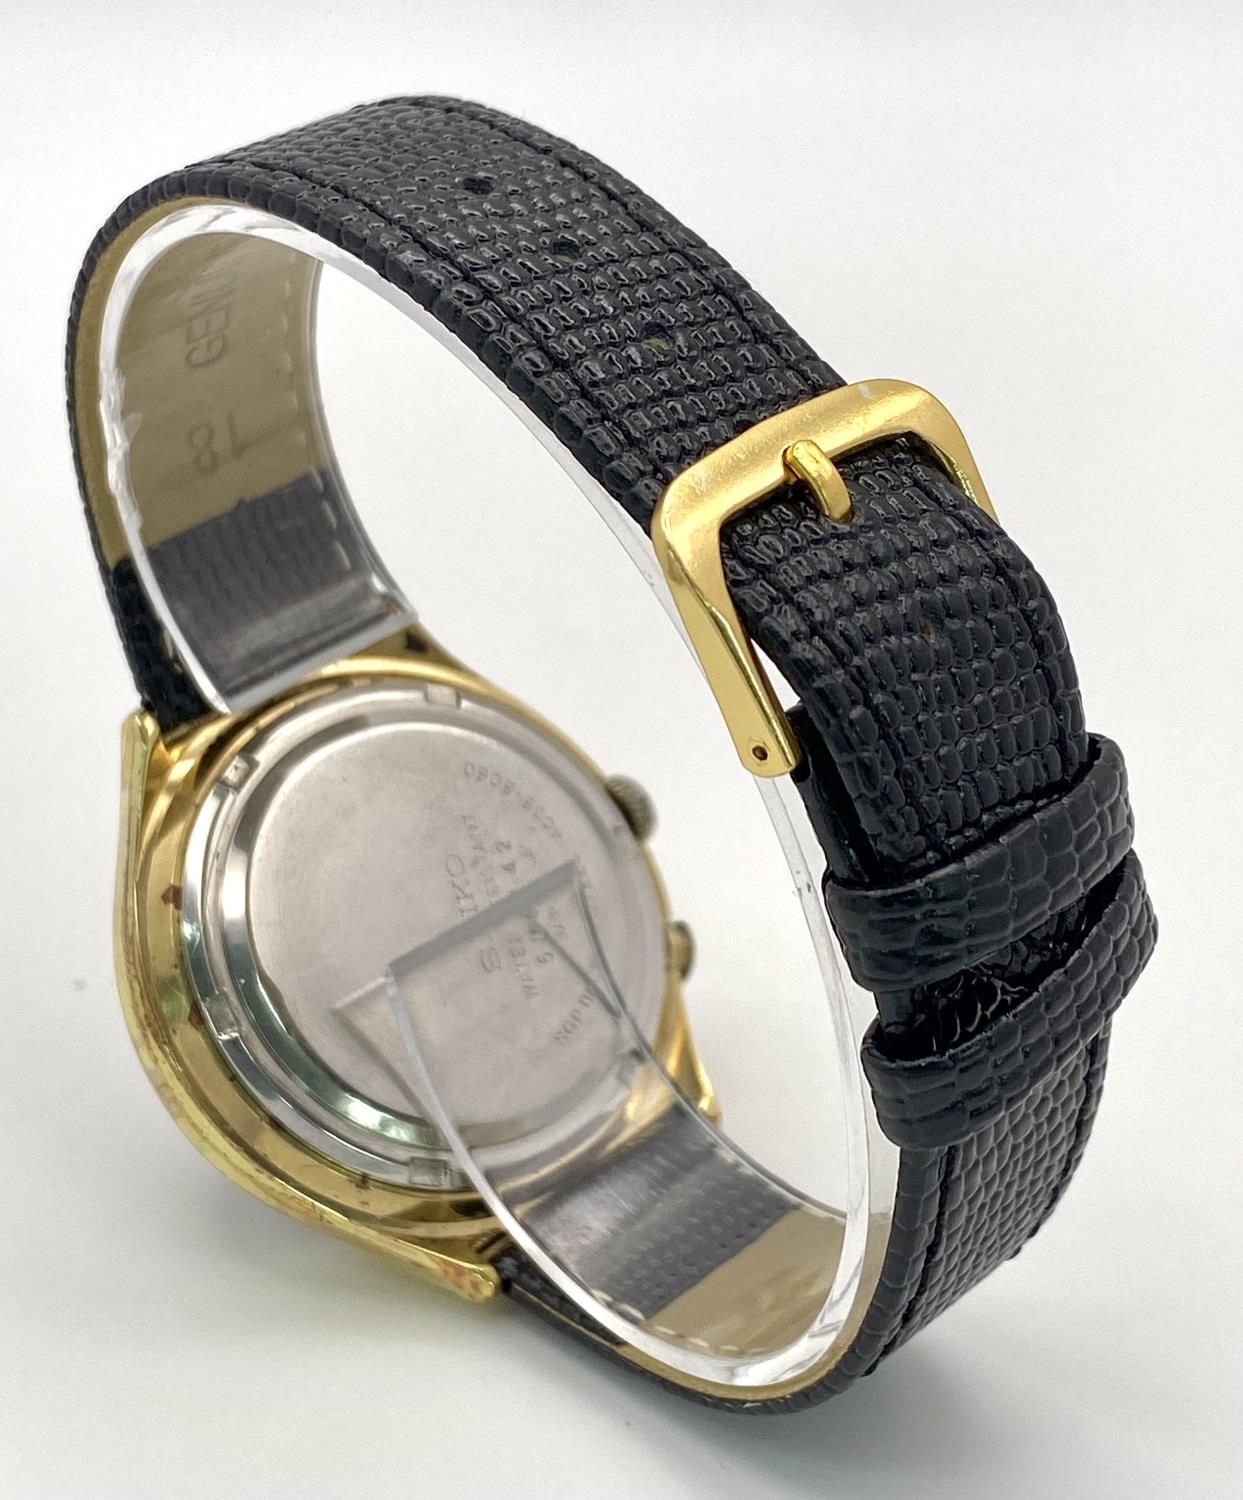 A Vintage Seiko Bell-Matic 17 Jewels Automatic Gents Watch. Black leather strap. Gilded case - 38mm. - Image 4 of 8